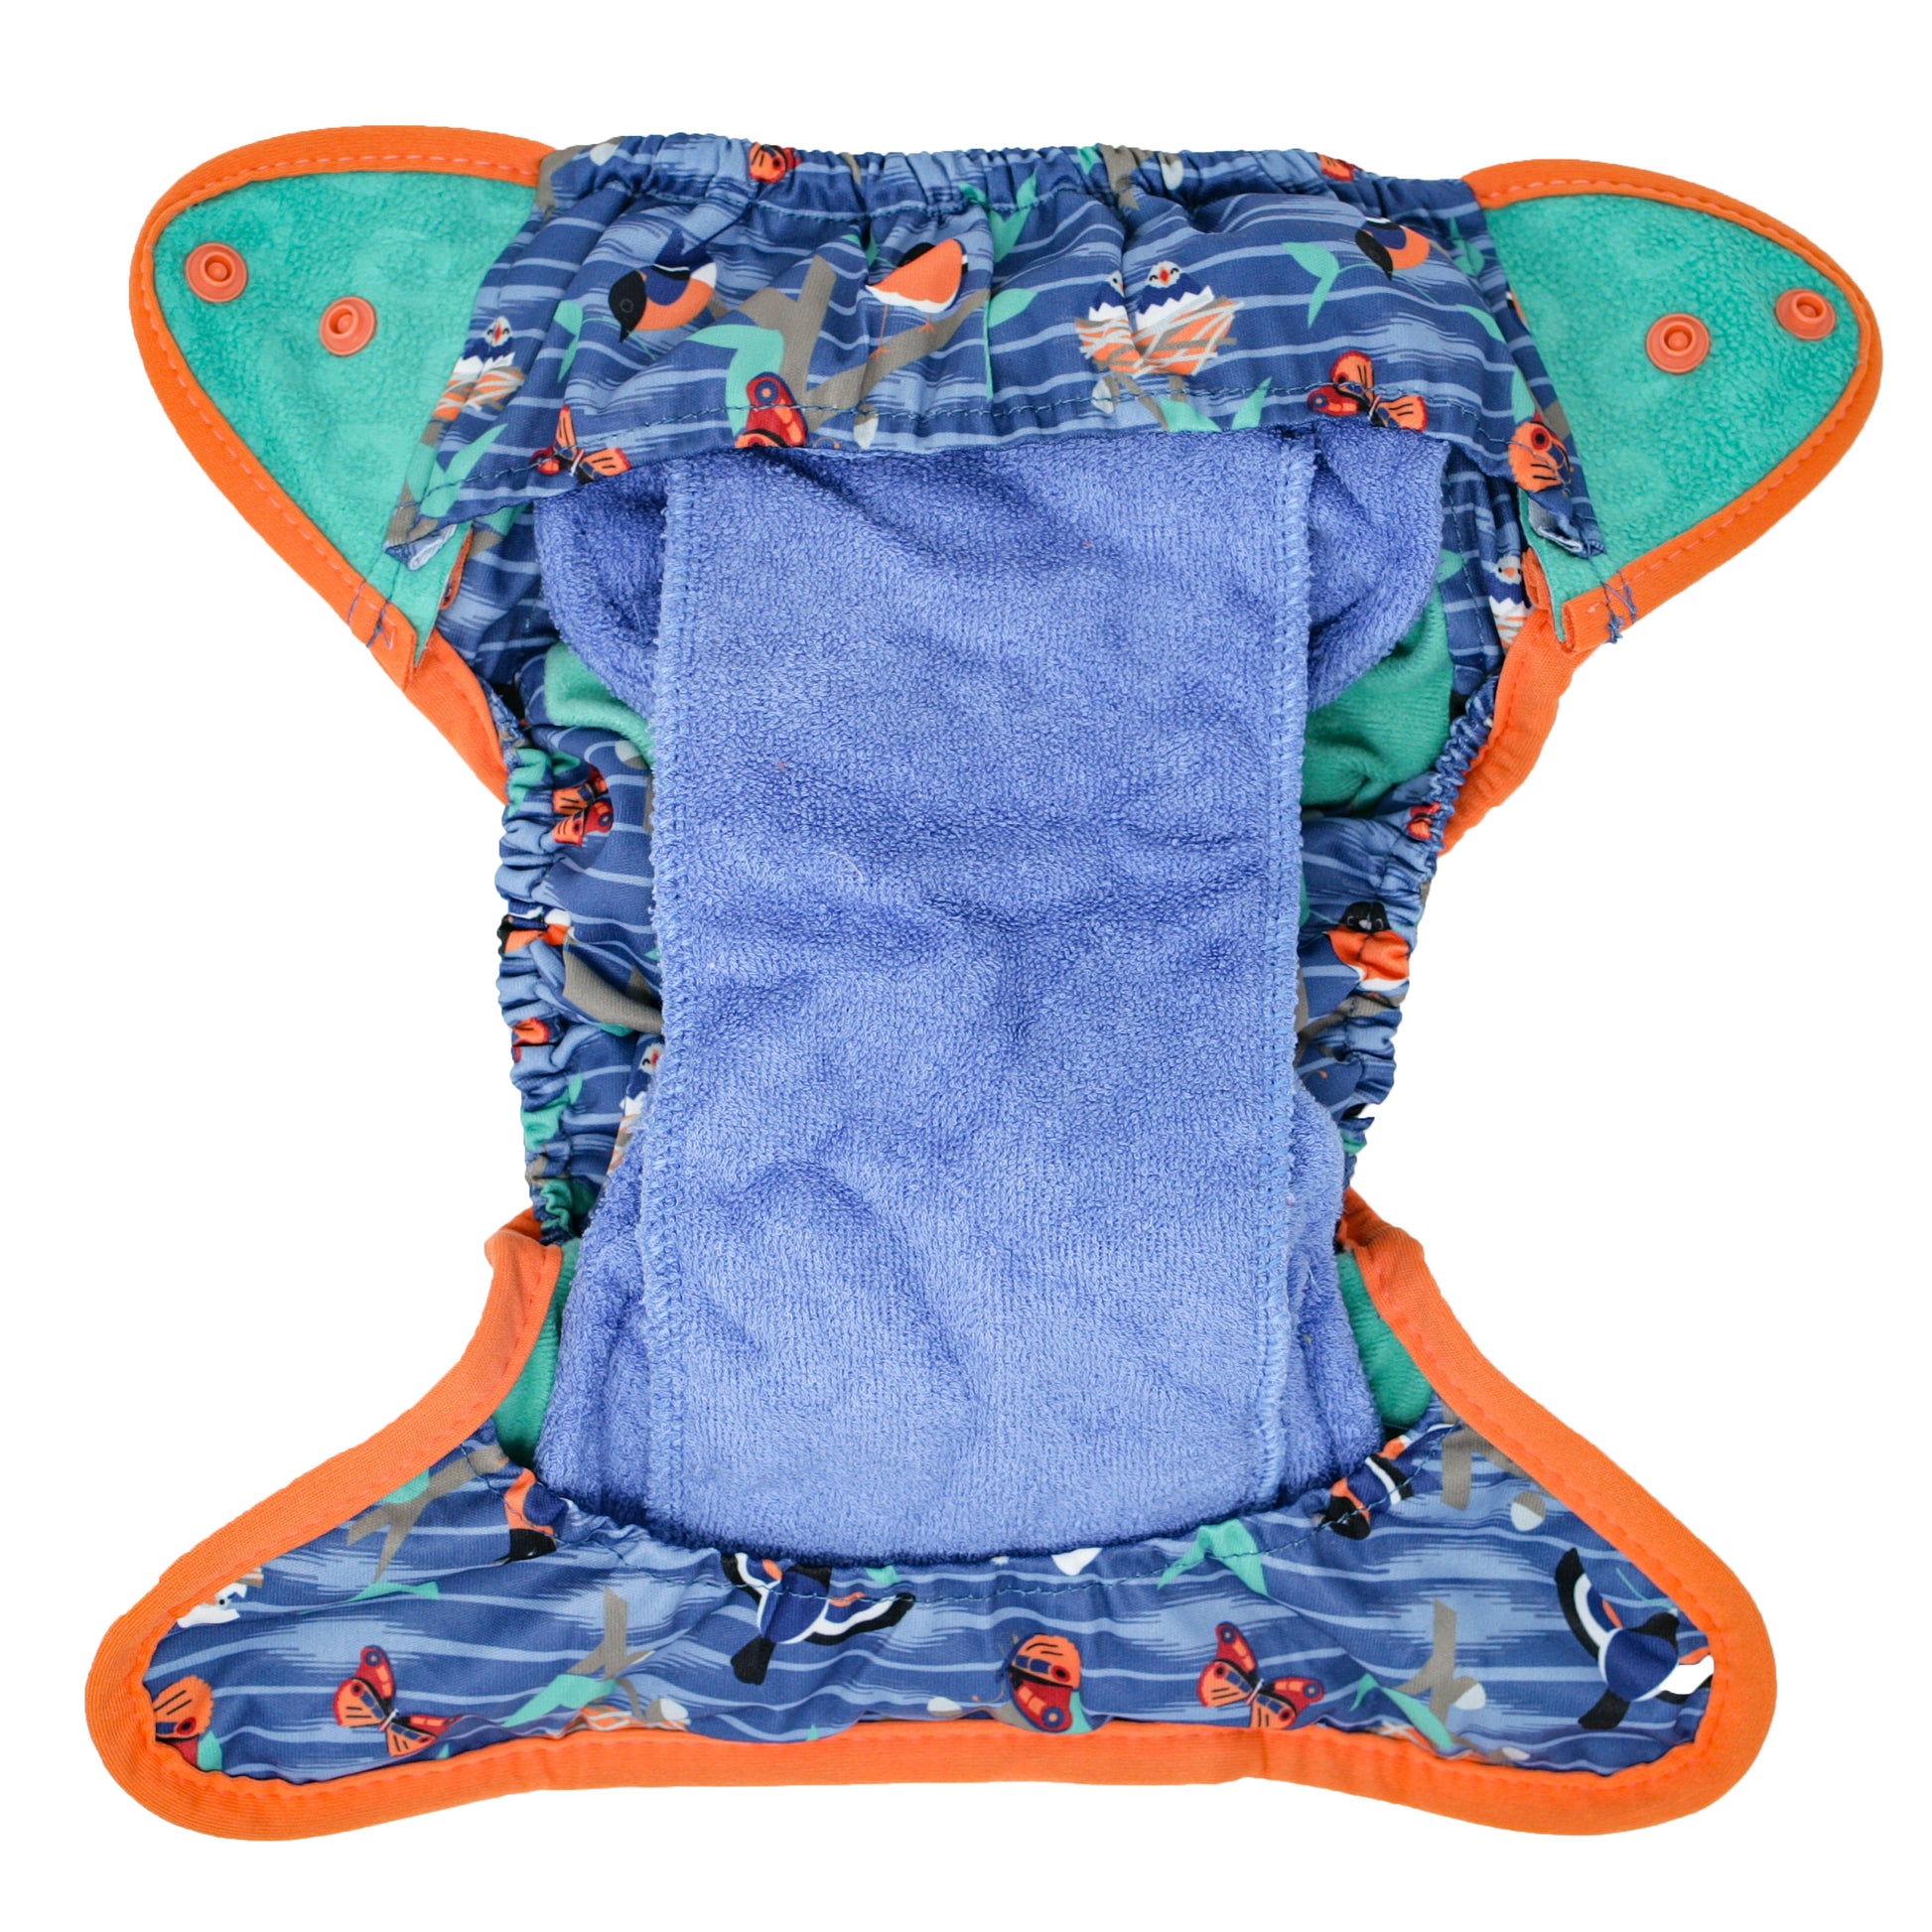 Inside Of Blue Orange Pop-in One Size Twilight Garden Reusable Cloth Nappy, With Popper Fastening